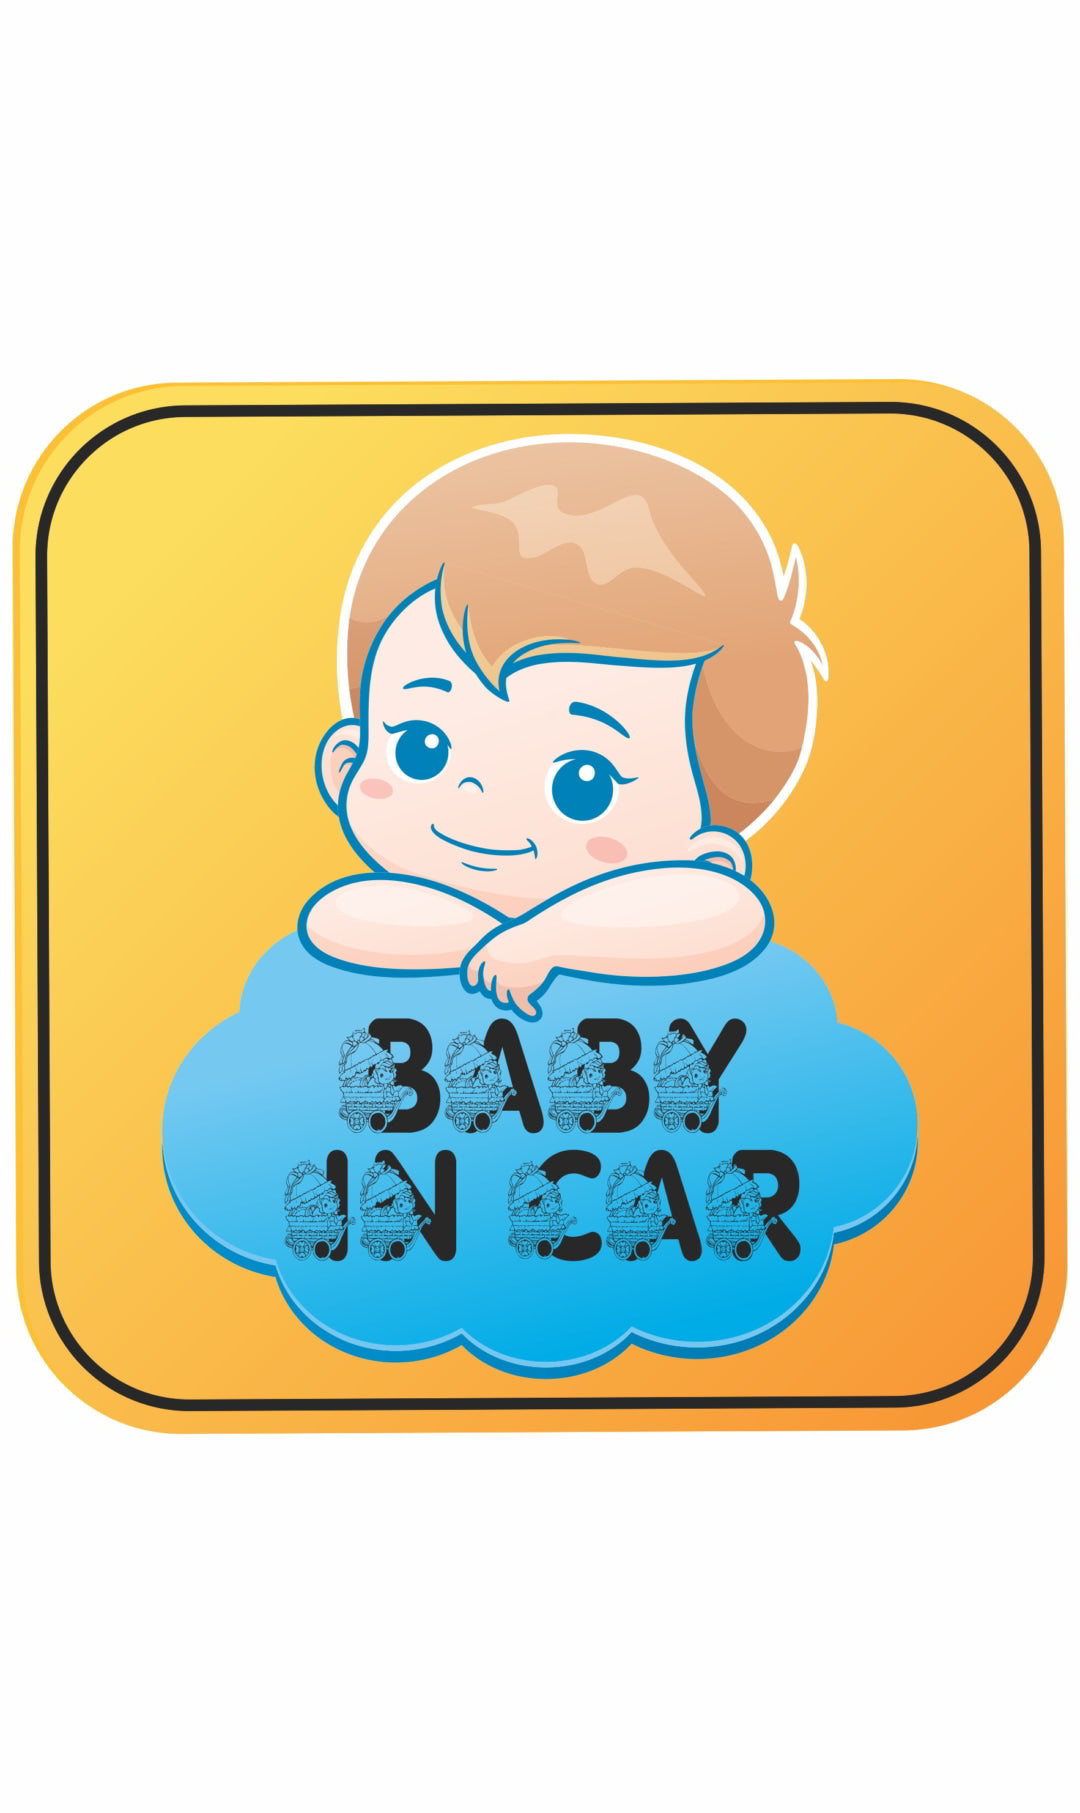 Baby in Car Decal Sticker(2pc)_c11